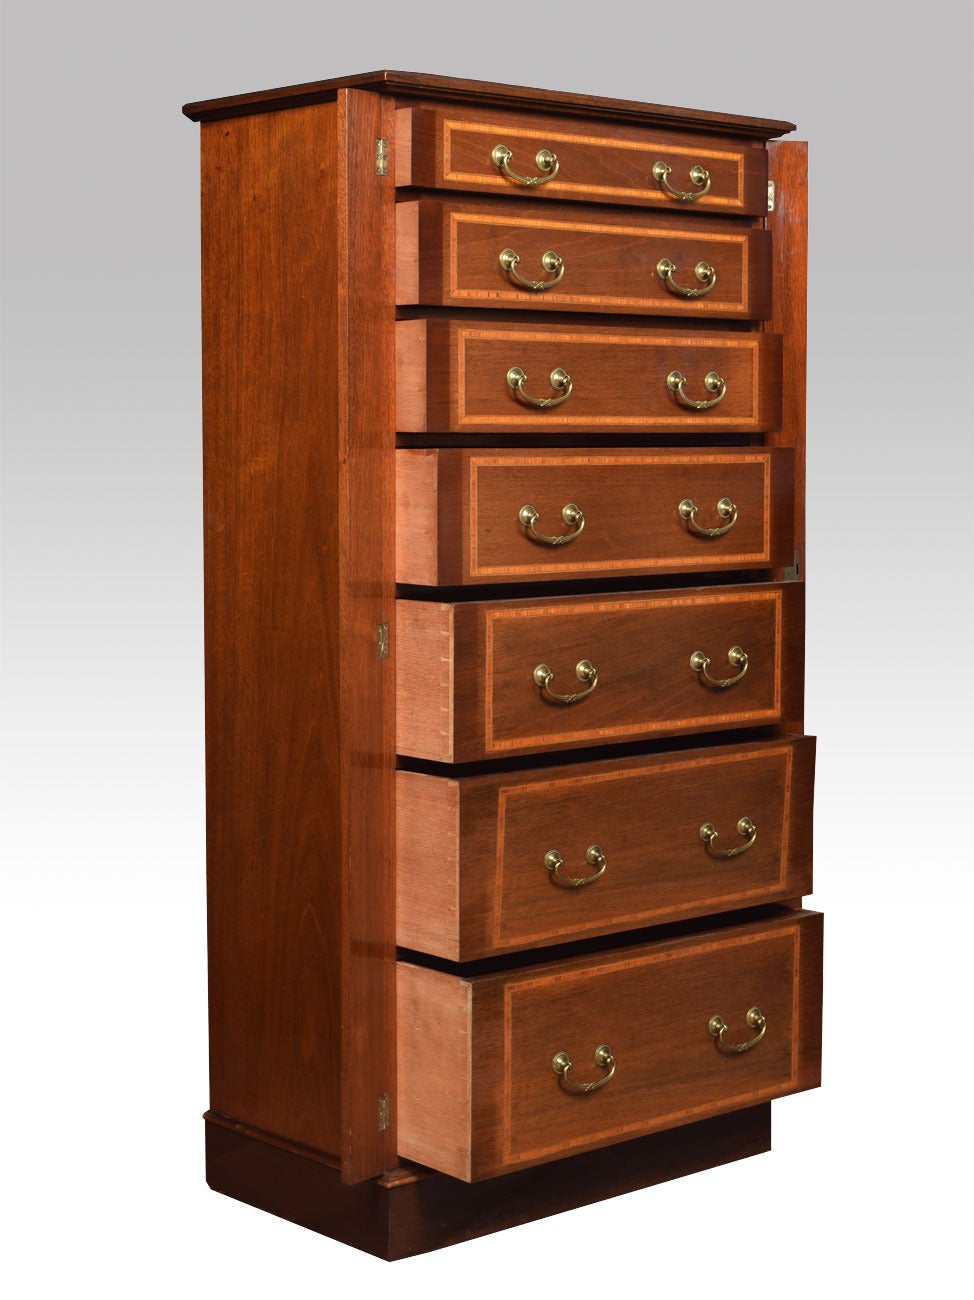 Early 20th century Edwardian mahogany and satinwood string inlaid Wellington chest the rectangular top above 7 graduated drawers each retaining original brass swan neck handles, all raised up on a plinth base.

Dimensions:

Height 52.5